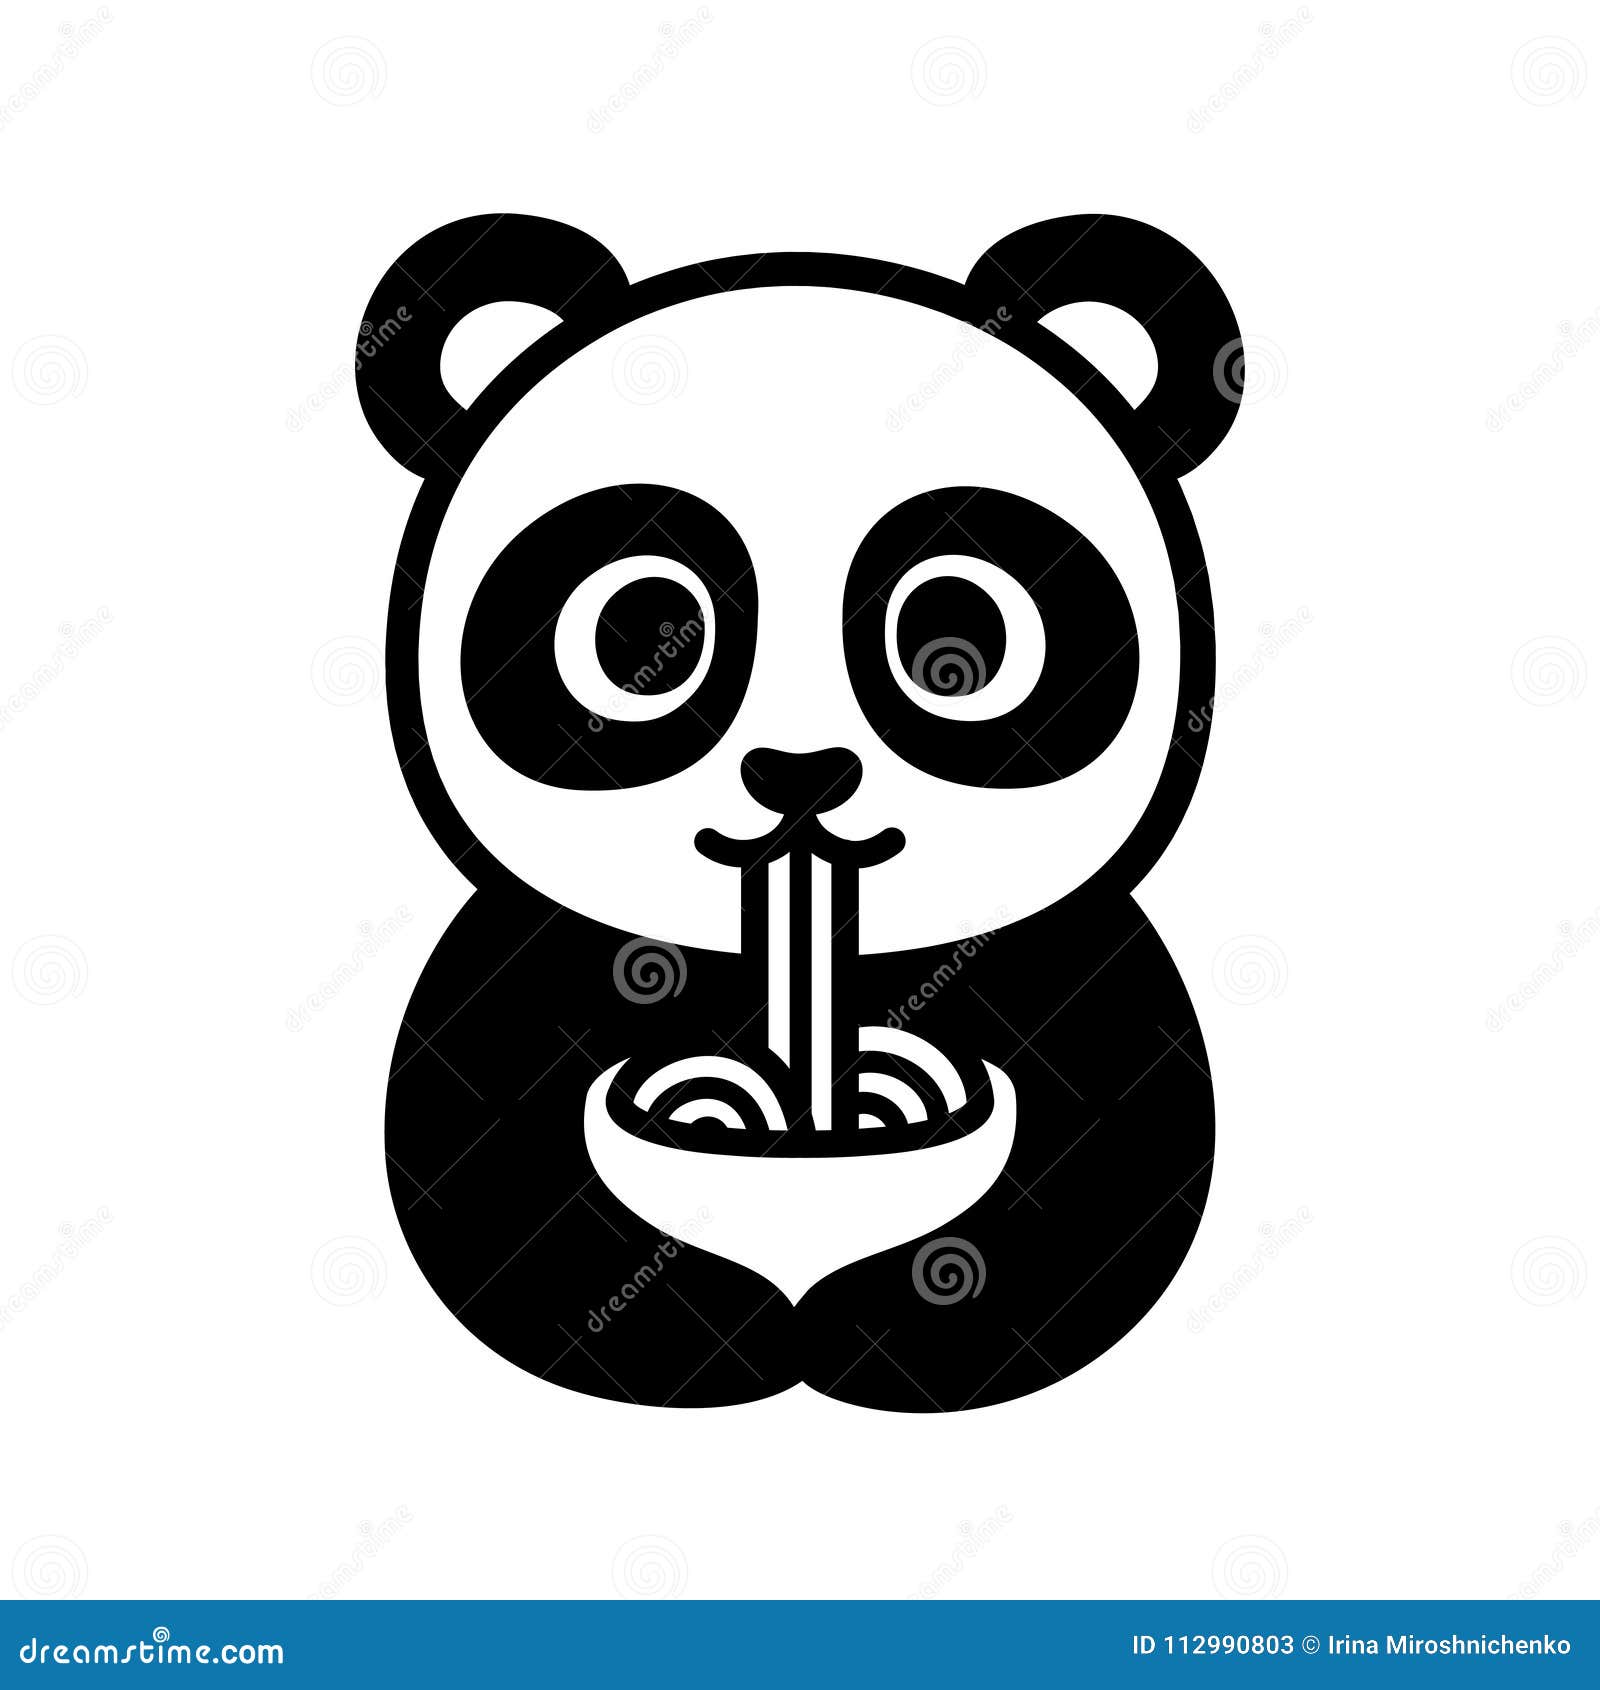 Cute panda eating noodles stock vector. Illustration of character